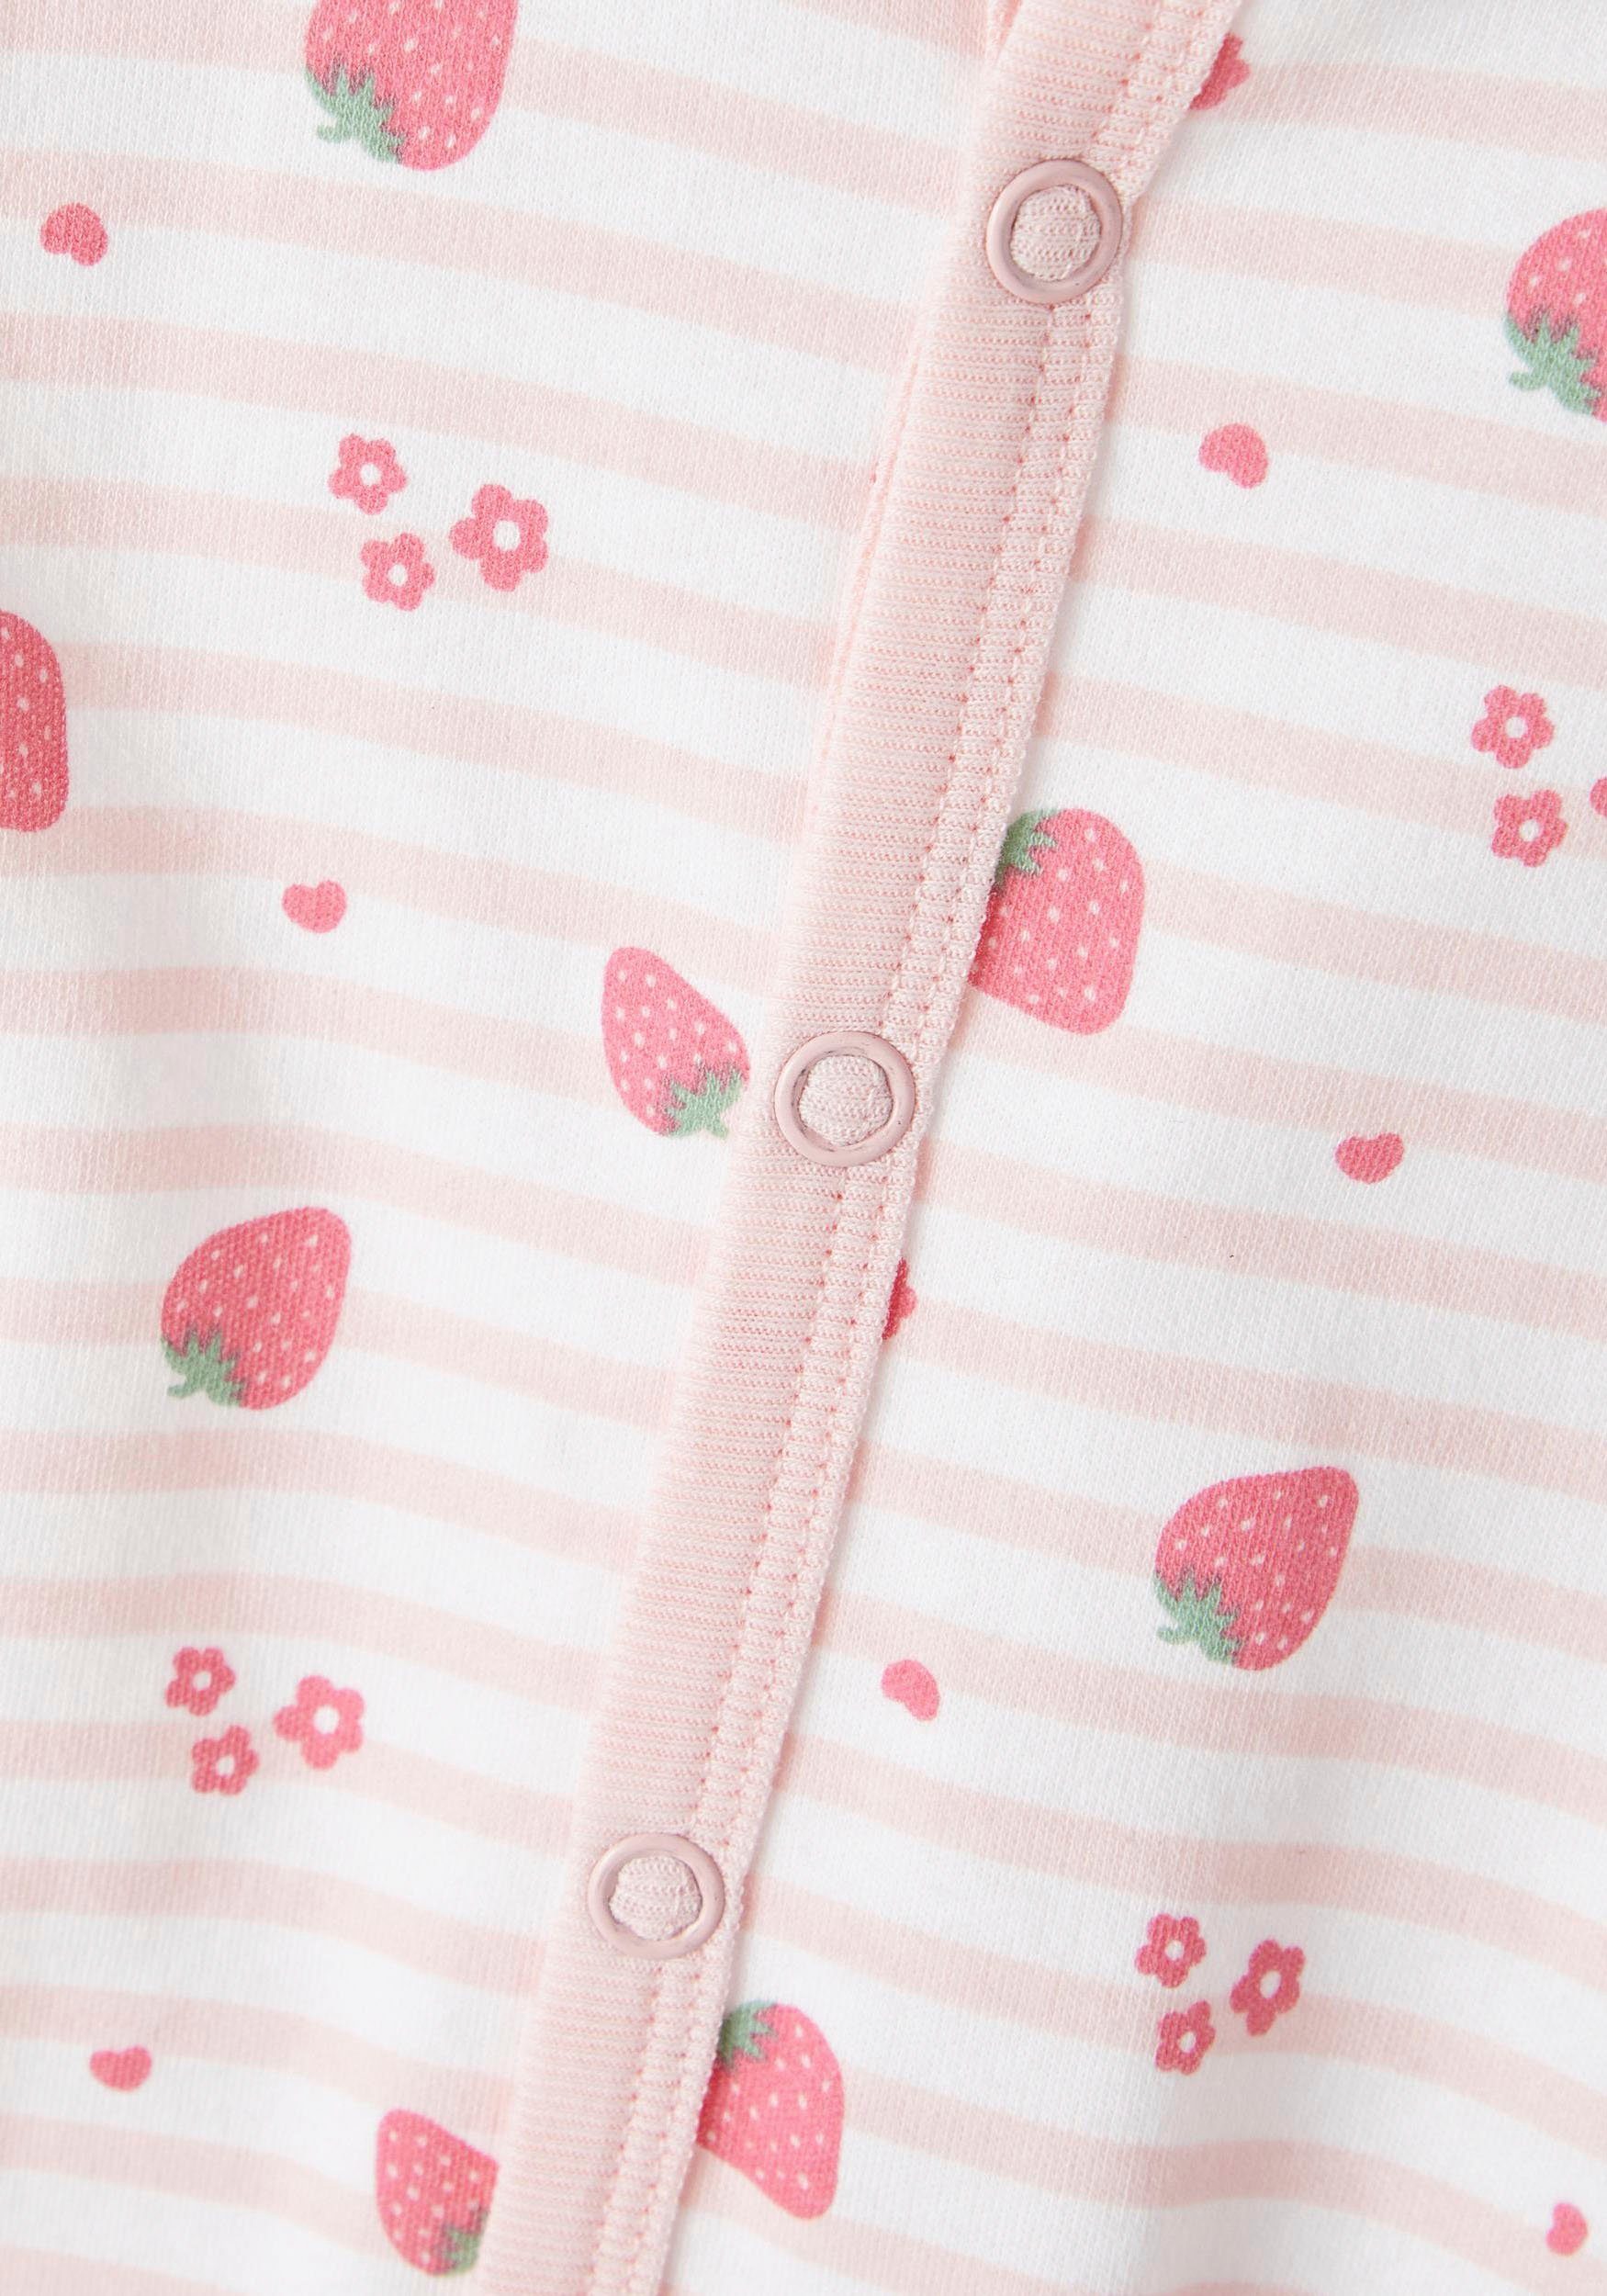 (Packung, Name STRAWBERRY W/F NOOS It 2P 2-tlg) Schlafoverall NBFNIGHTSUIT